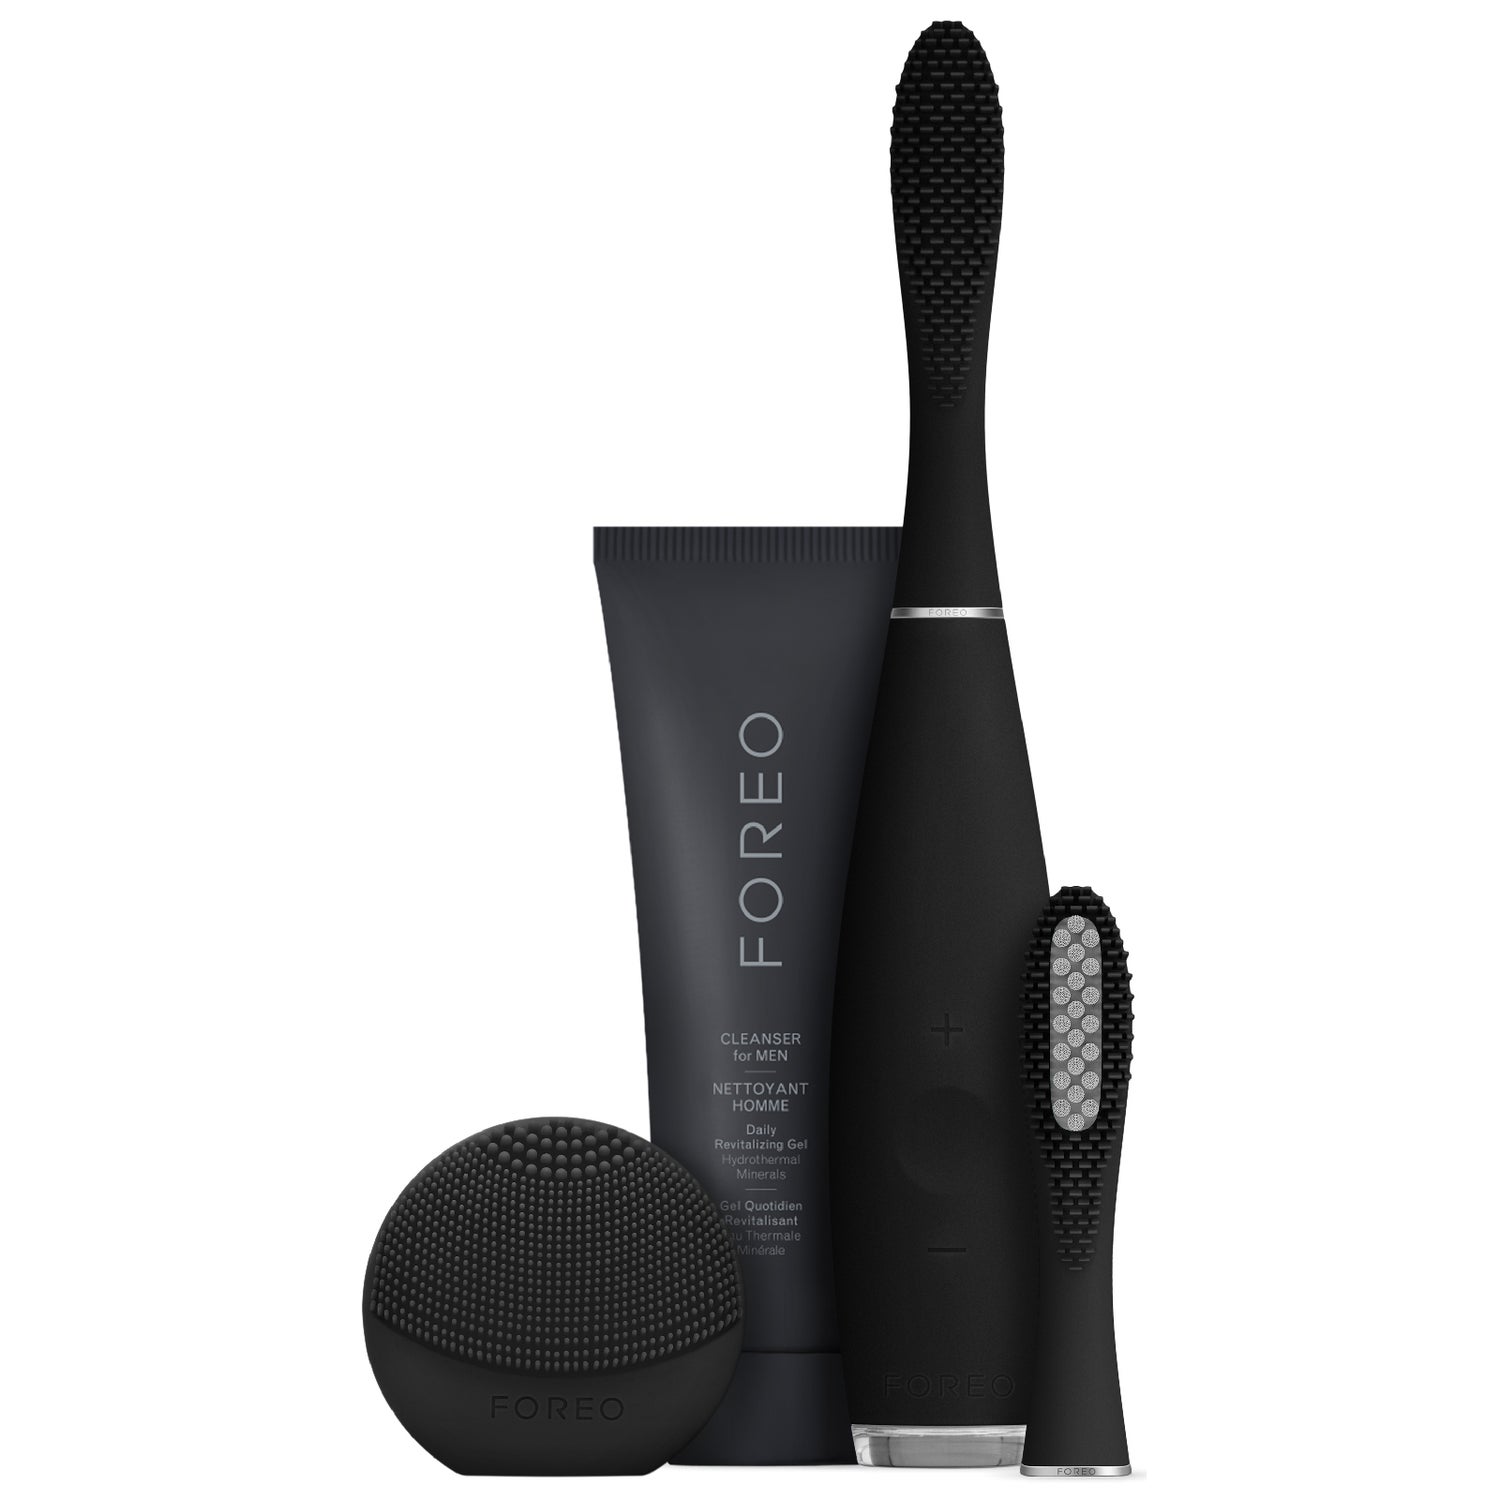 FOREO Complete Male Grooming Collection - (ISSA, Hybrid Brush Head, LUNA Play) Midnight (Worth £212)